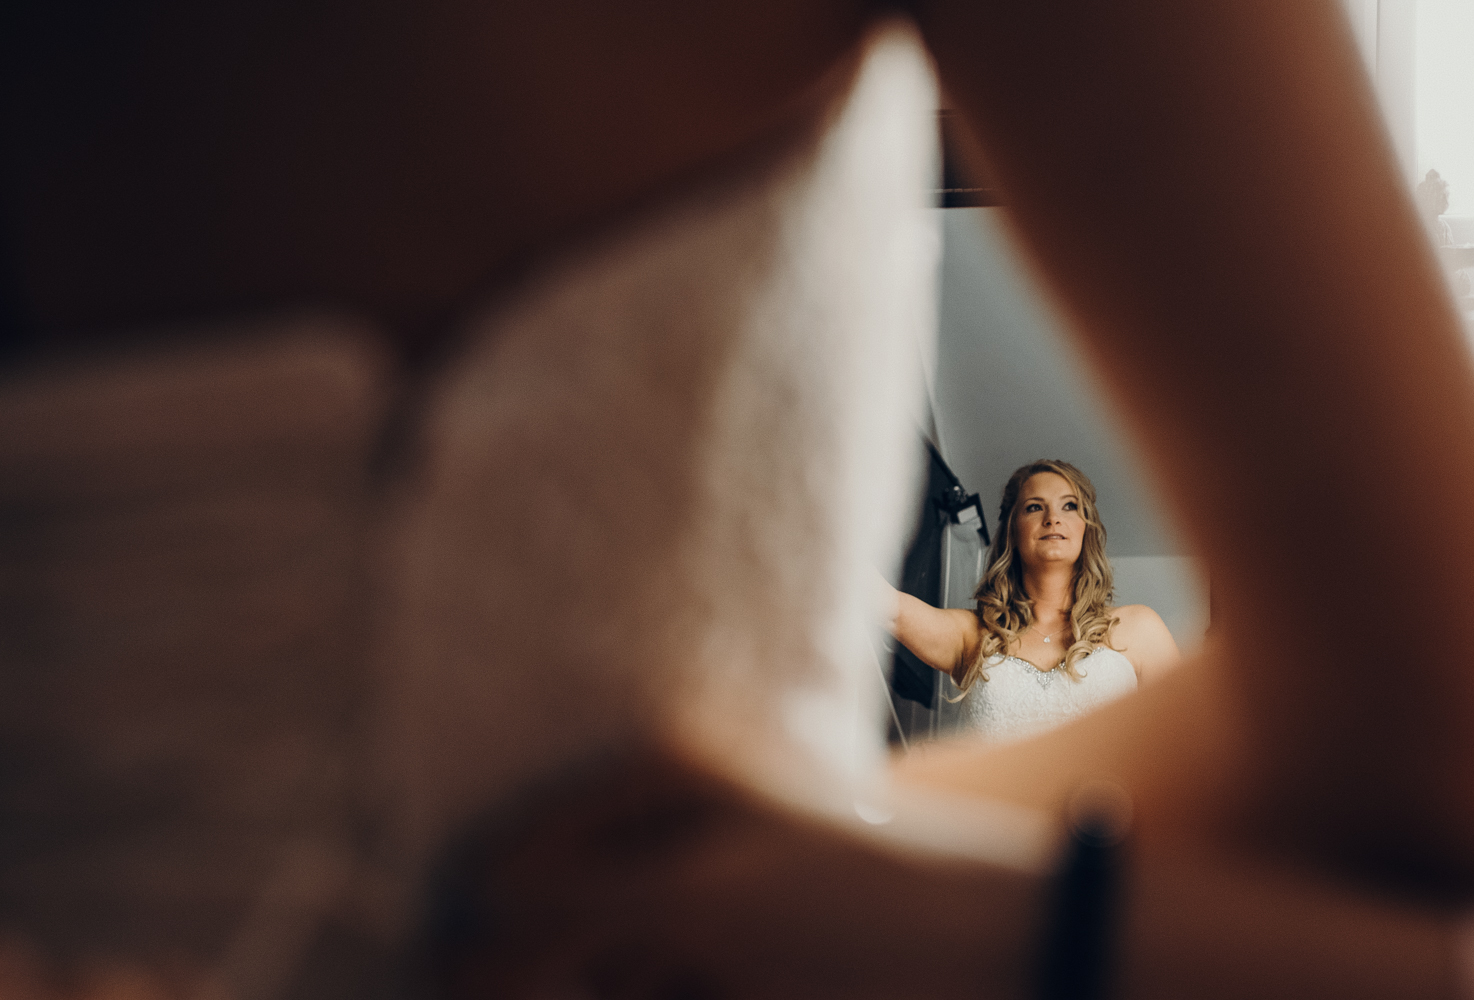 A photograph of a bride taken in the dressing mirror during bridal preparations